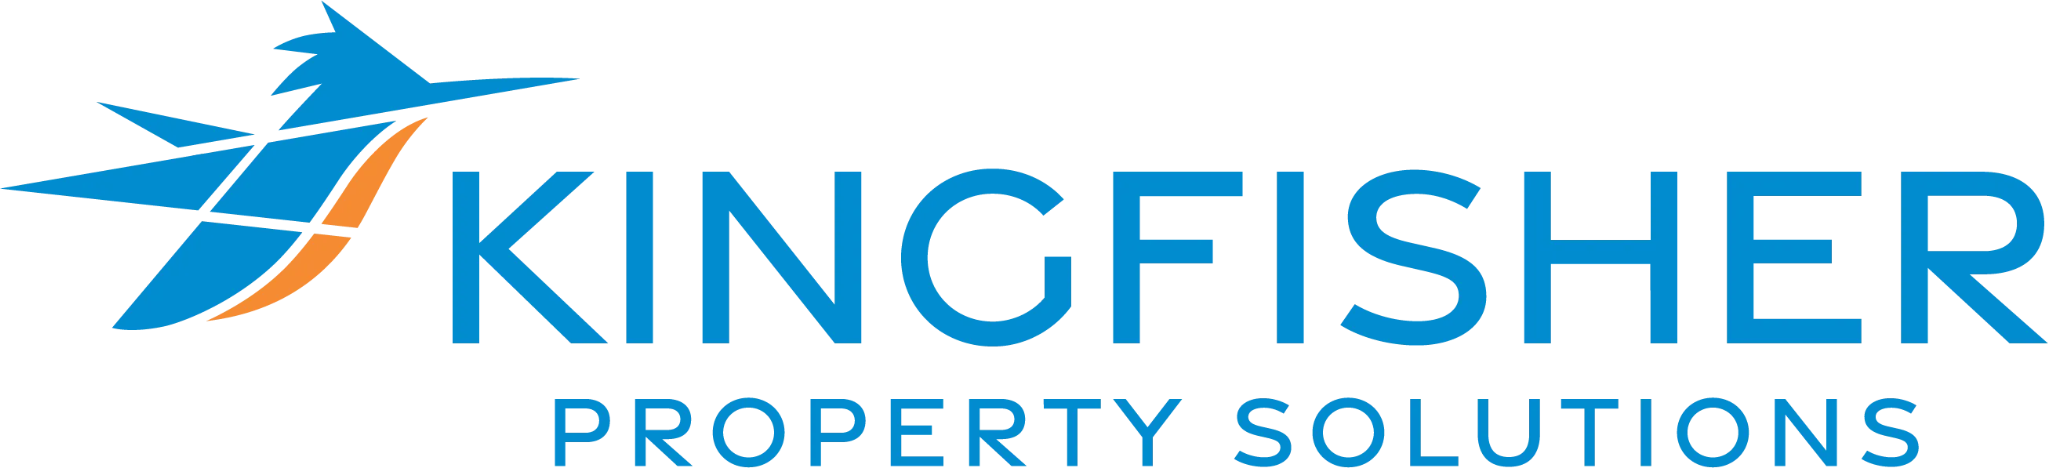 Kingfisher Property Solutions logo